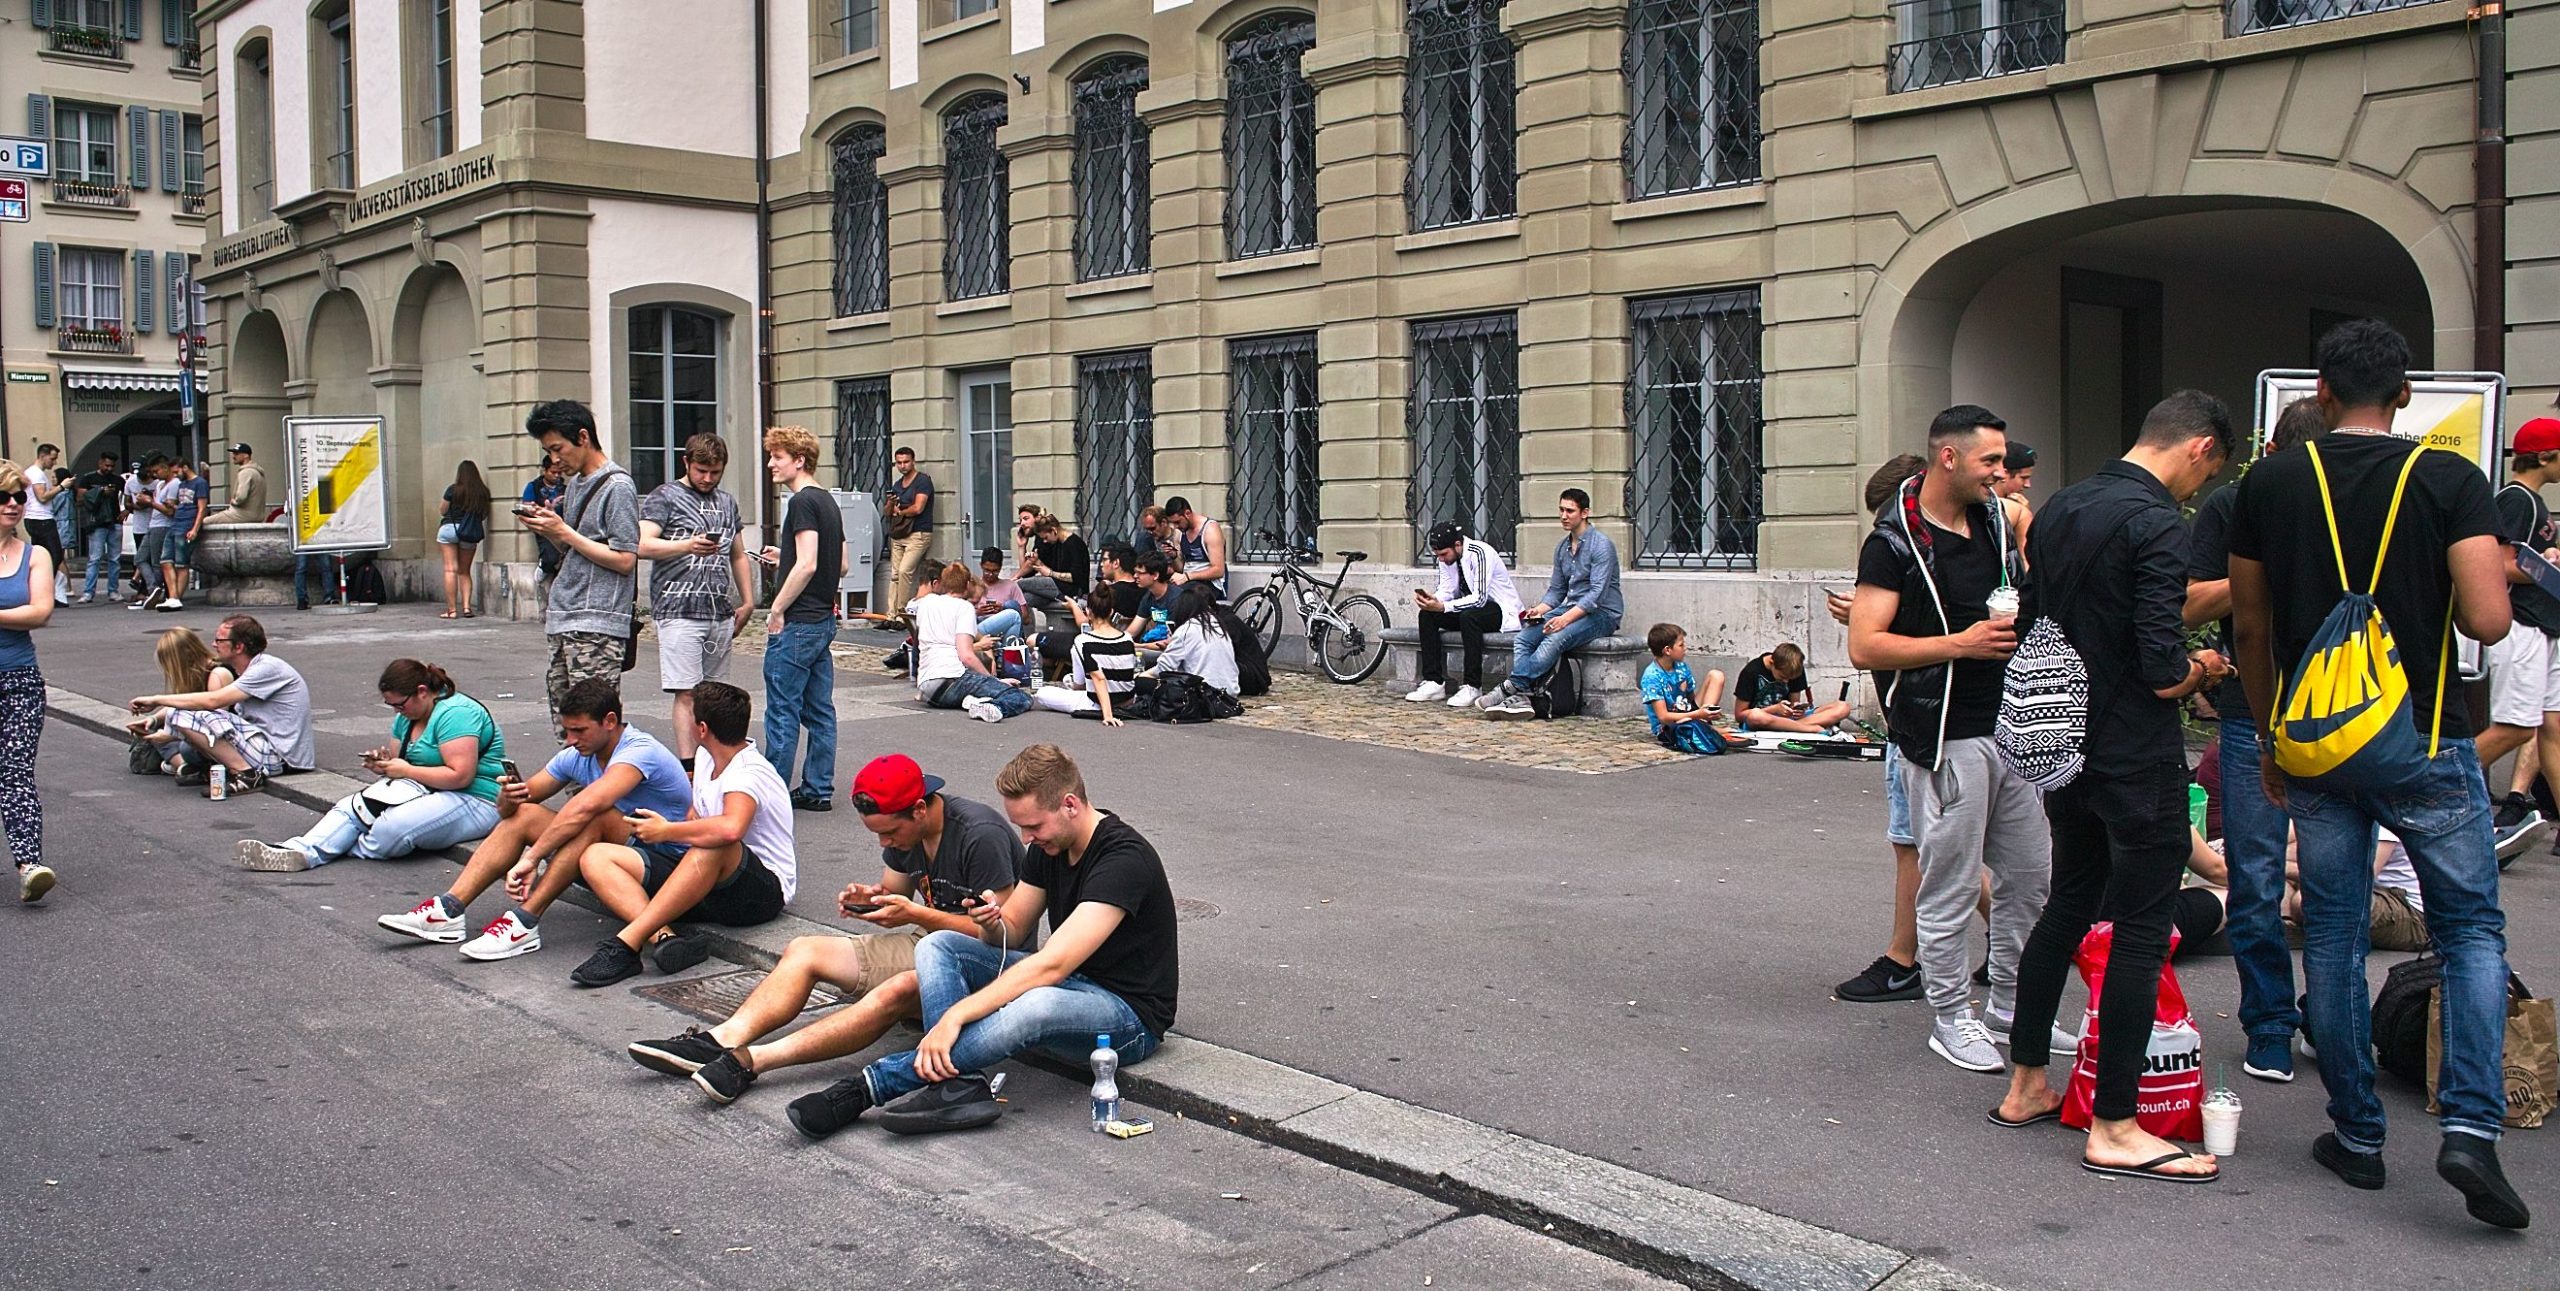 Pokéstop in Bern People gathering to collect Pokémon in Bern Photo by: Fred Schaerli CC-BY-SA 4.0